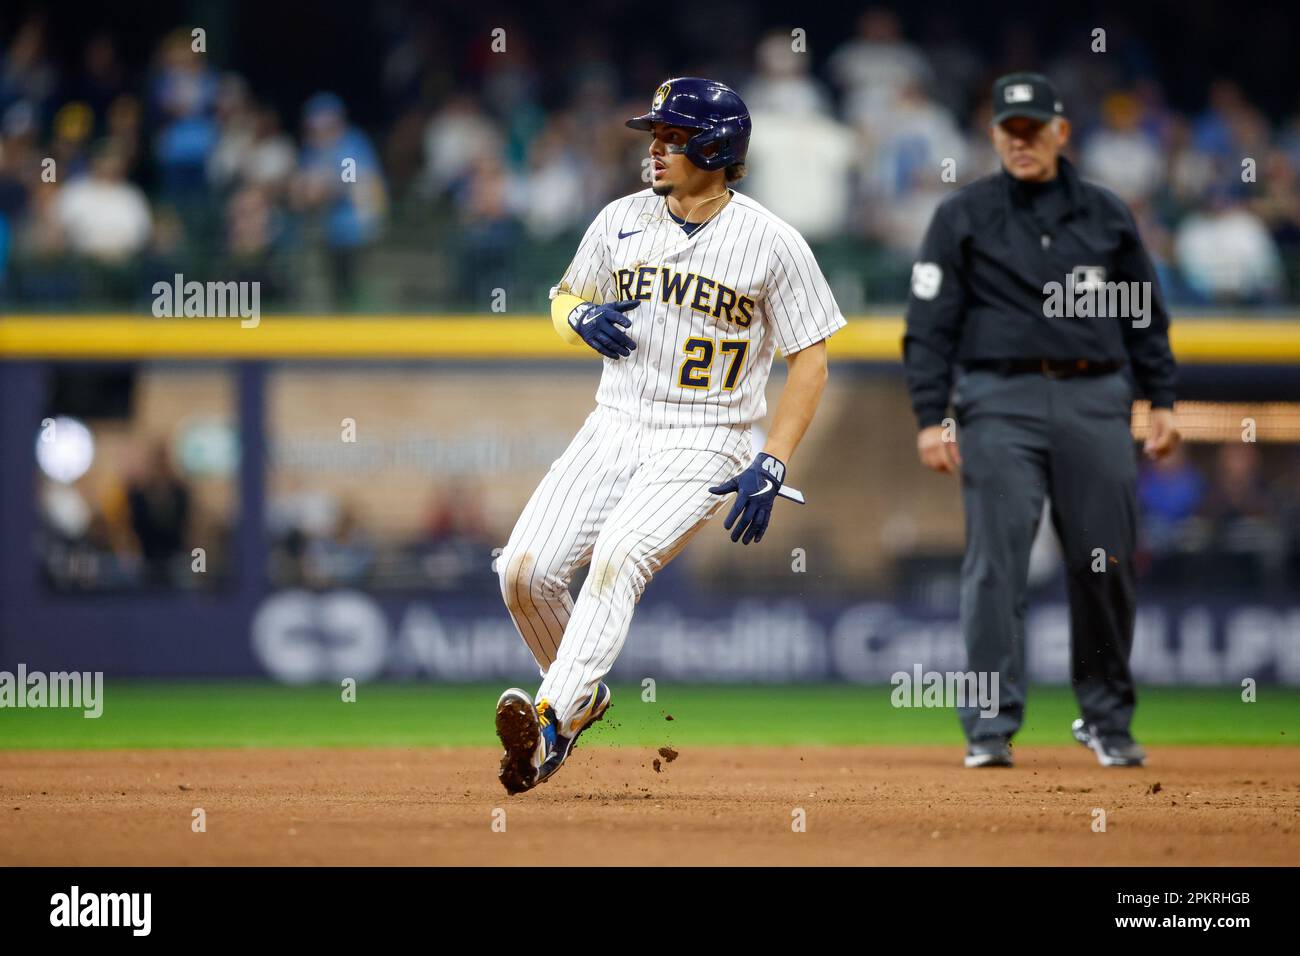 What to know about Brewers shortstop Willy Adames